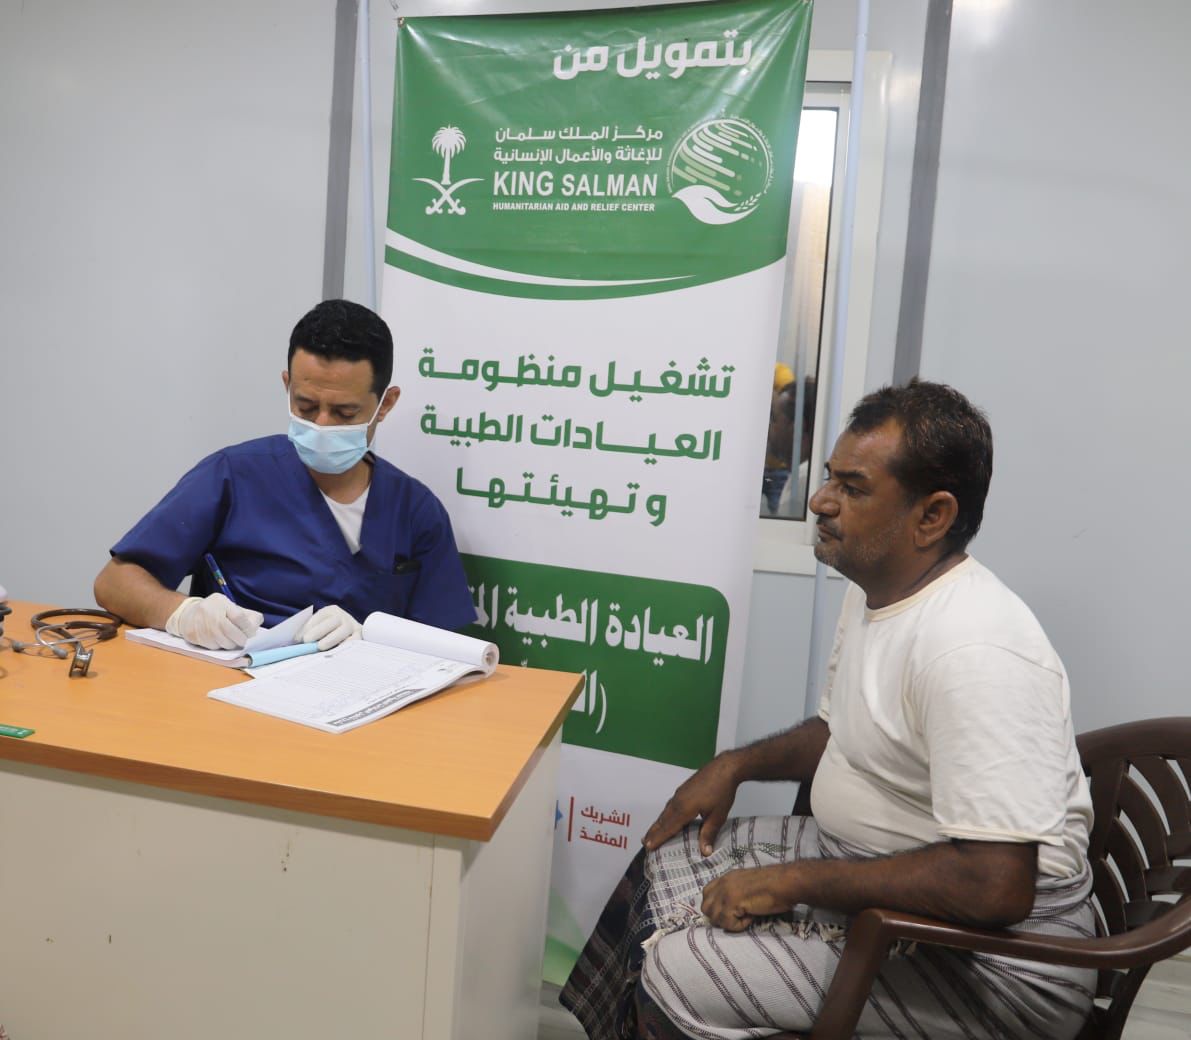 KSrelief Mobile Medical Clinics Receive 1,012 Beneficiaries in Hajjah Governorate during One Week